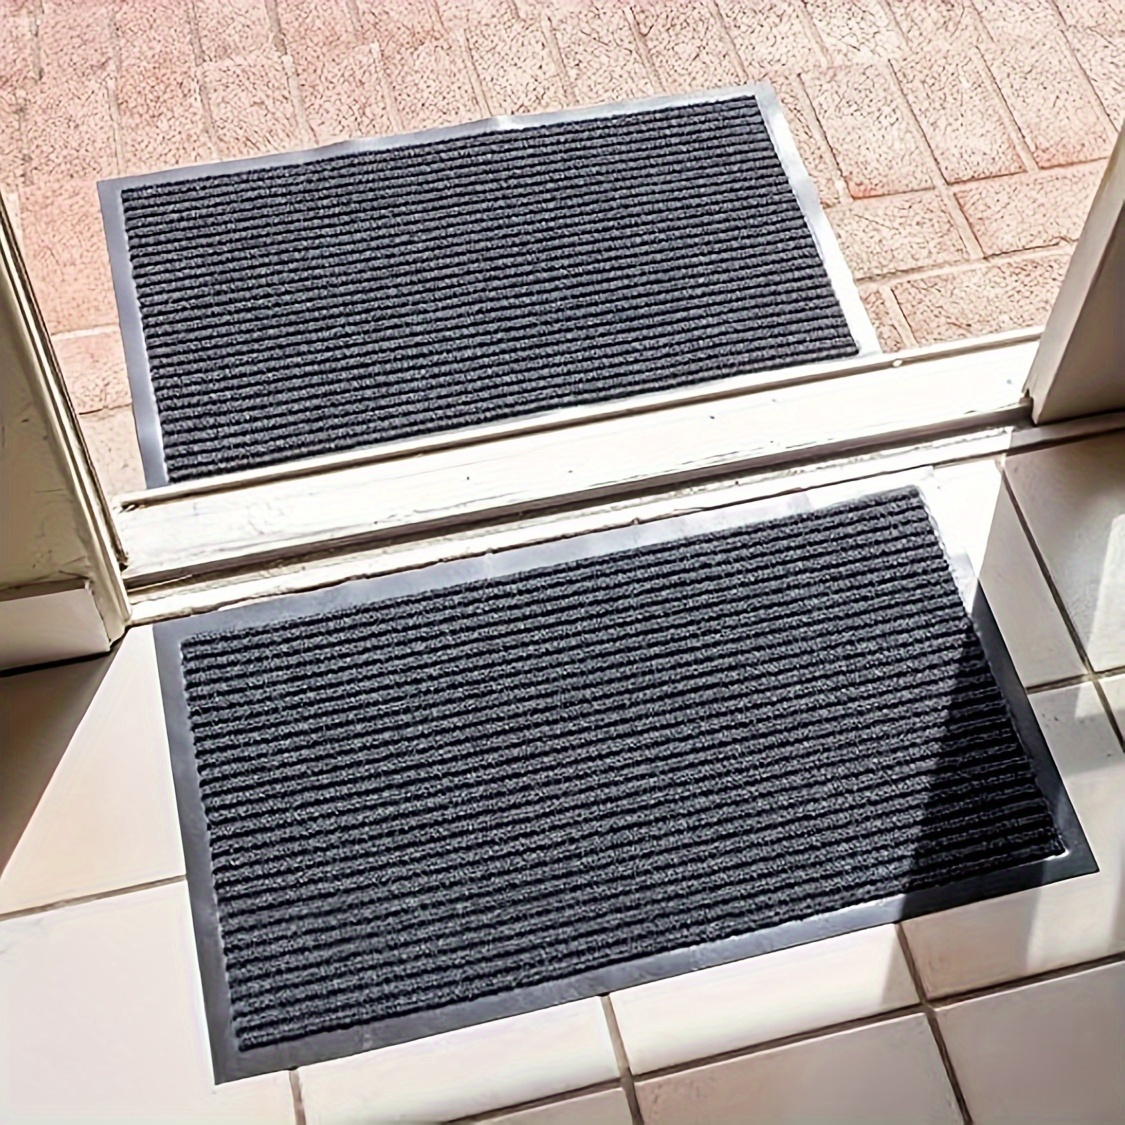 

1pcs Entryway Door Mat: Household Kitchen Anti-slip, Bathroom Entrance Water Absorbing, Rectangular Striped, Machine-made Pvc Backing, Hand Washable, Non-slip, Water Resistant, Suitable For Home Decor